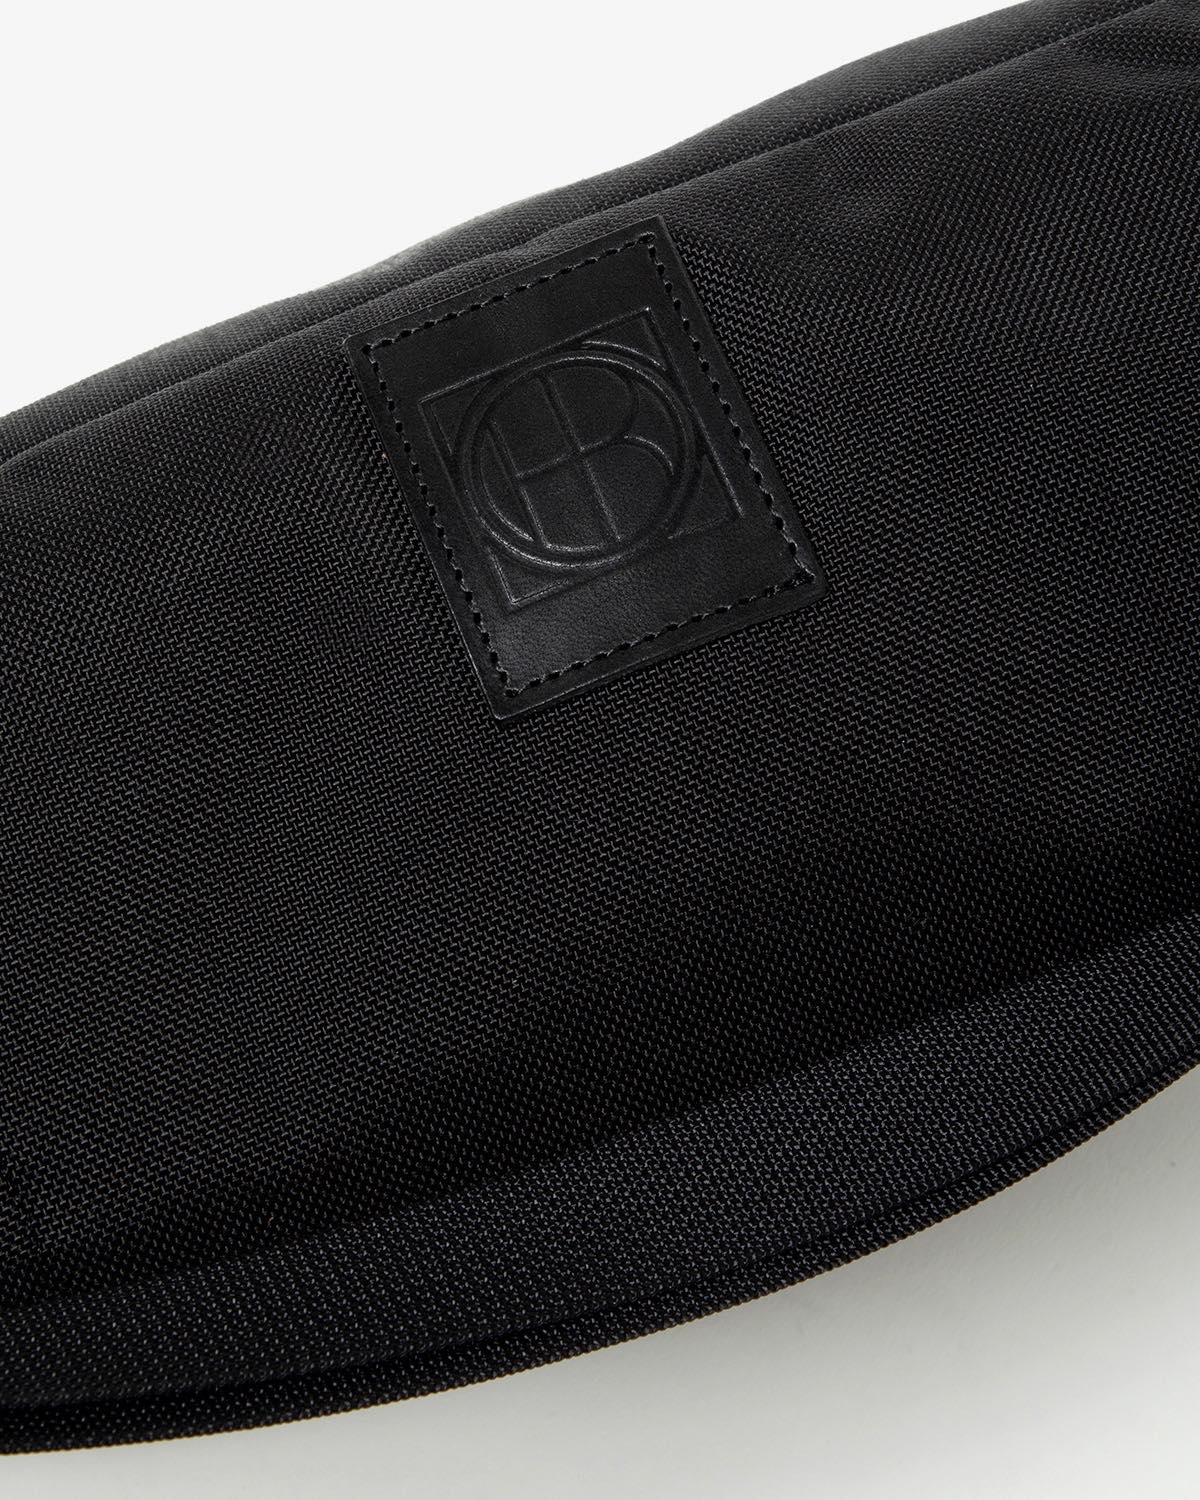 WAIST POUCH NYLON OXFORD with COW SUEDE